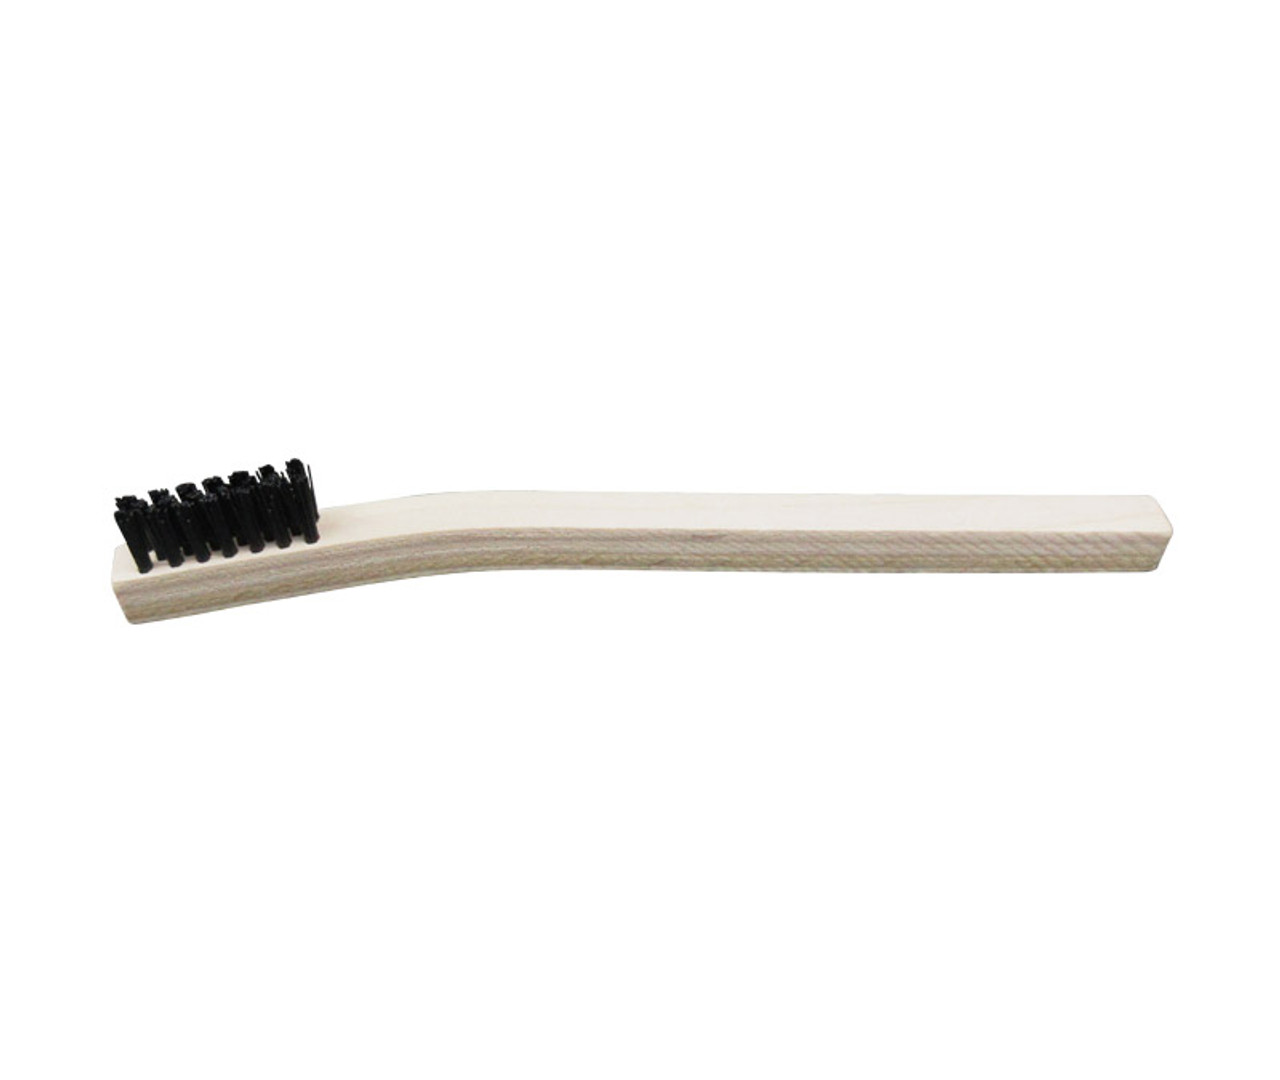 wood handle clipper cleaning brush